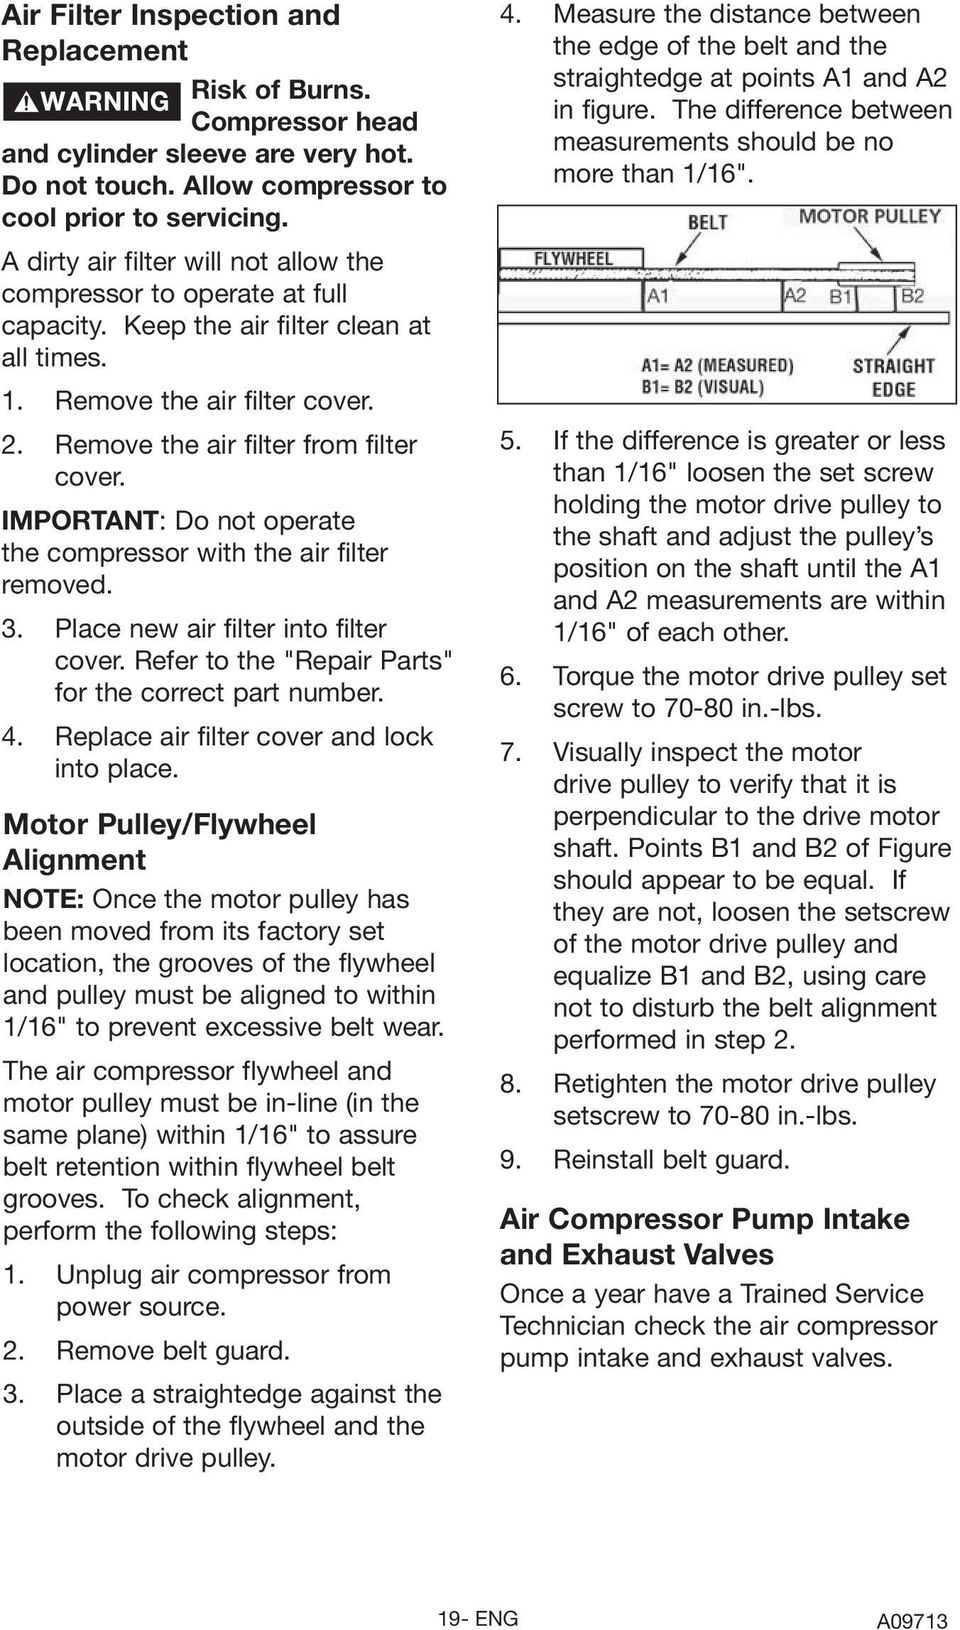 IMPORTANT: Do not operate the compressor with the air filter removed. 3. Place new air filter into filter cover. Refer to the "Repair Parts" for the correct part number. 4.